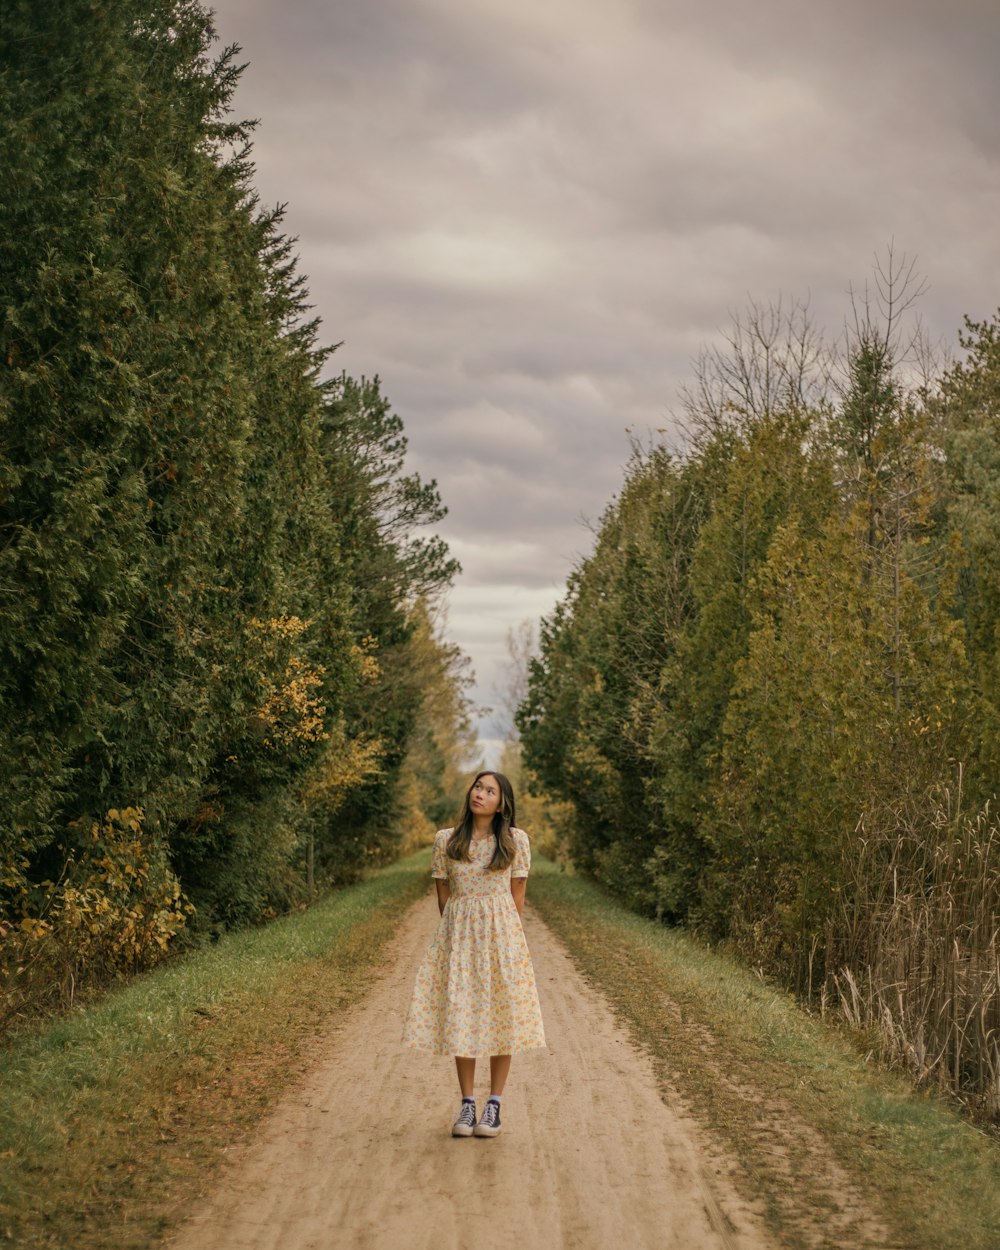 a woman standing on a dirt road surrounded by trees